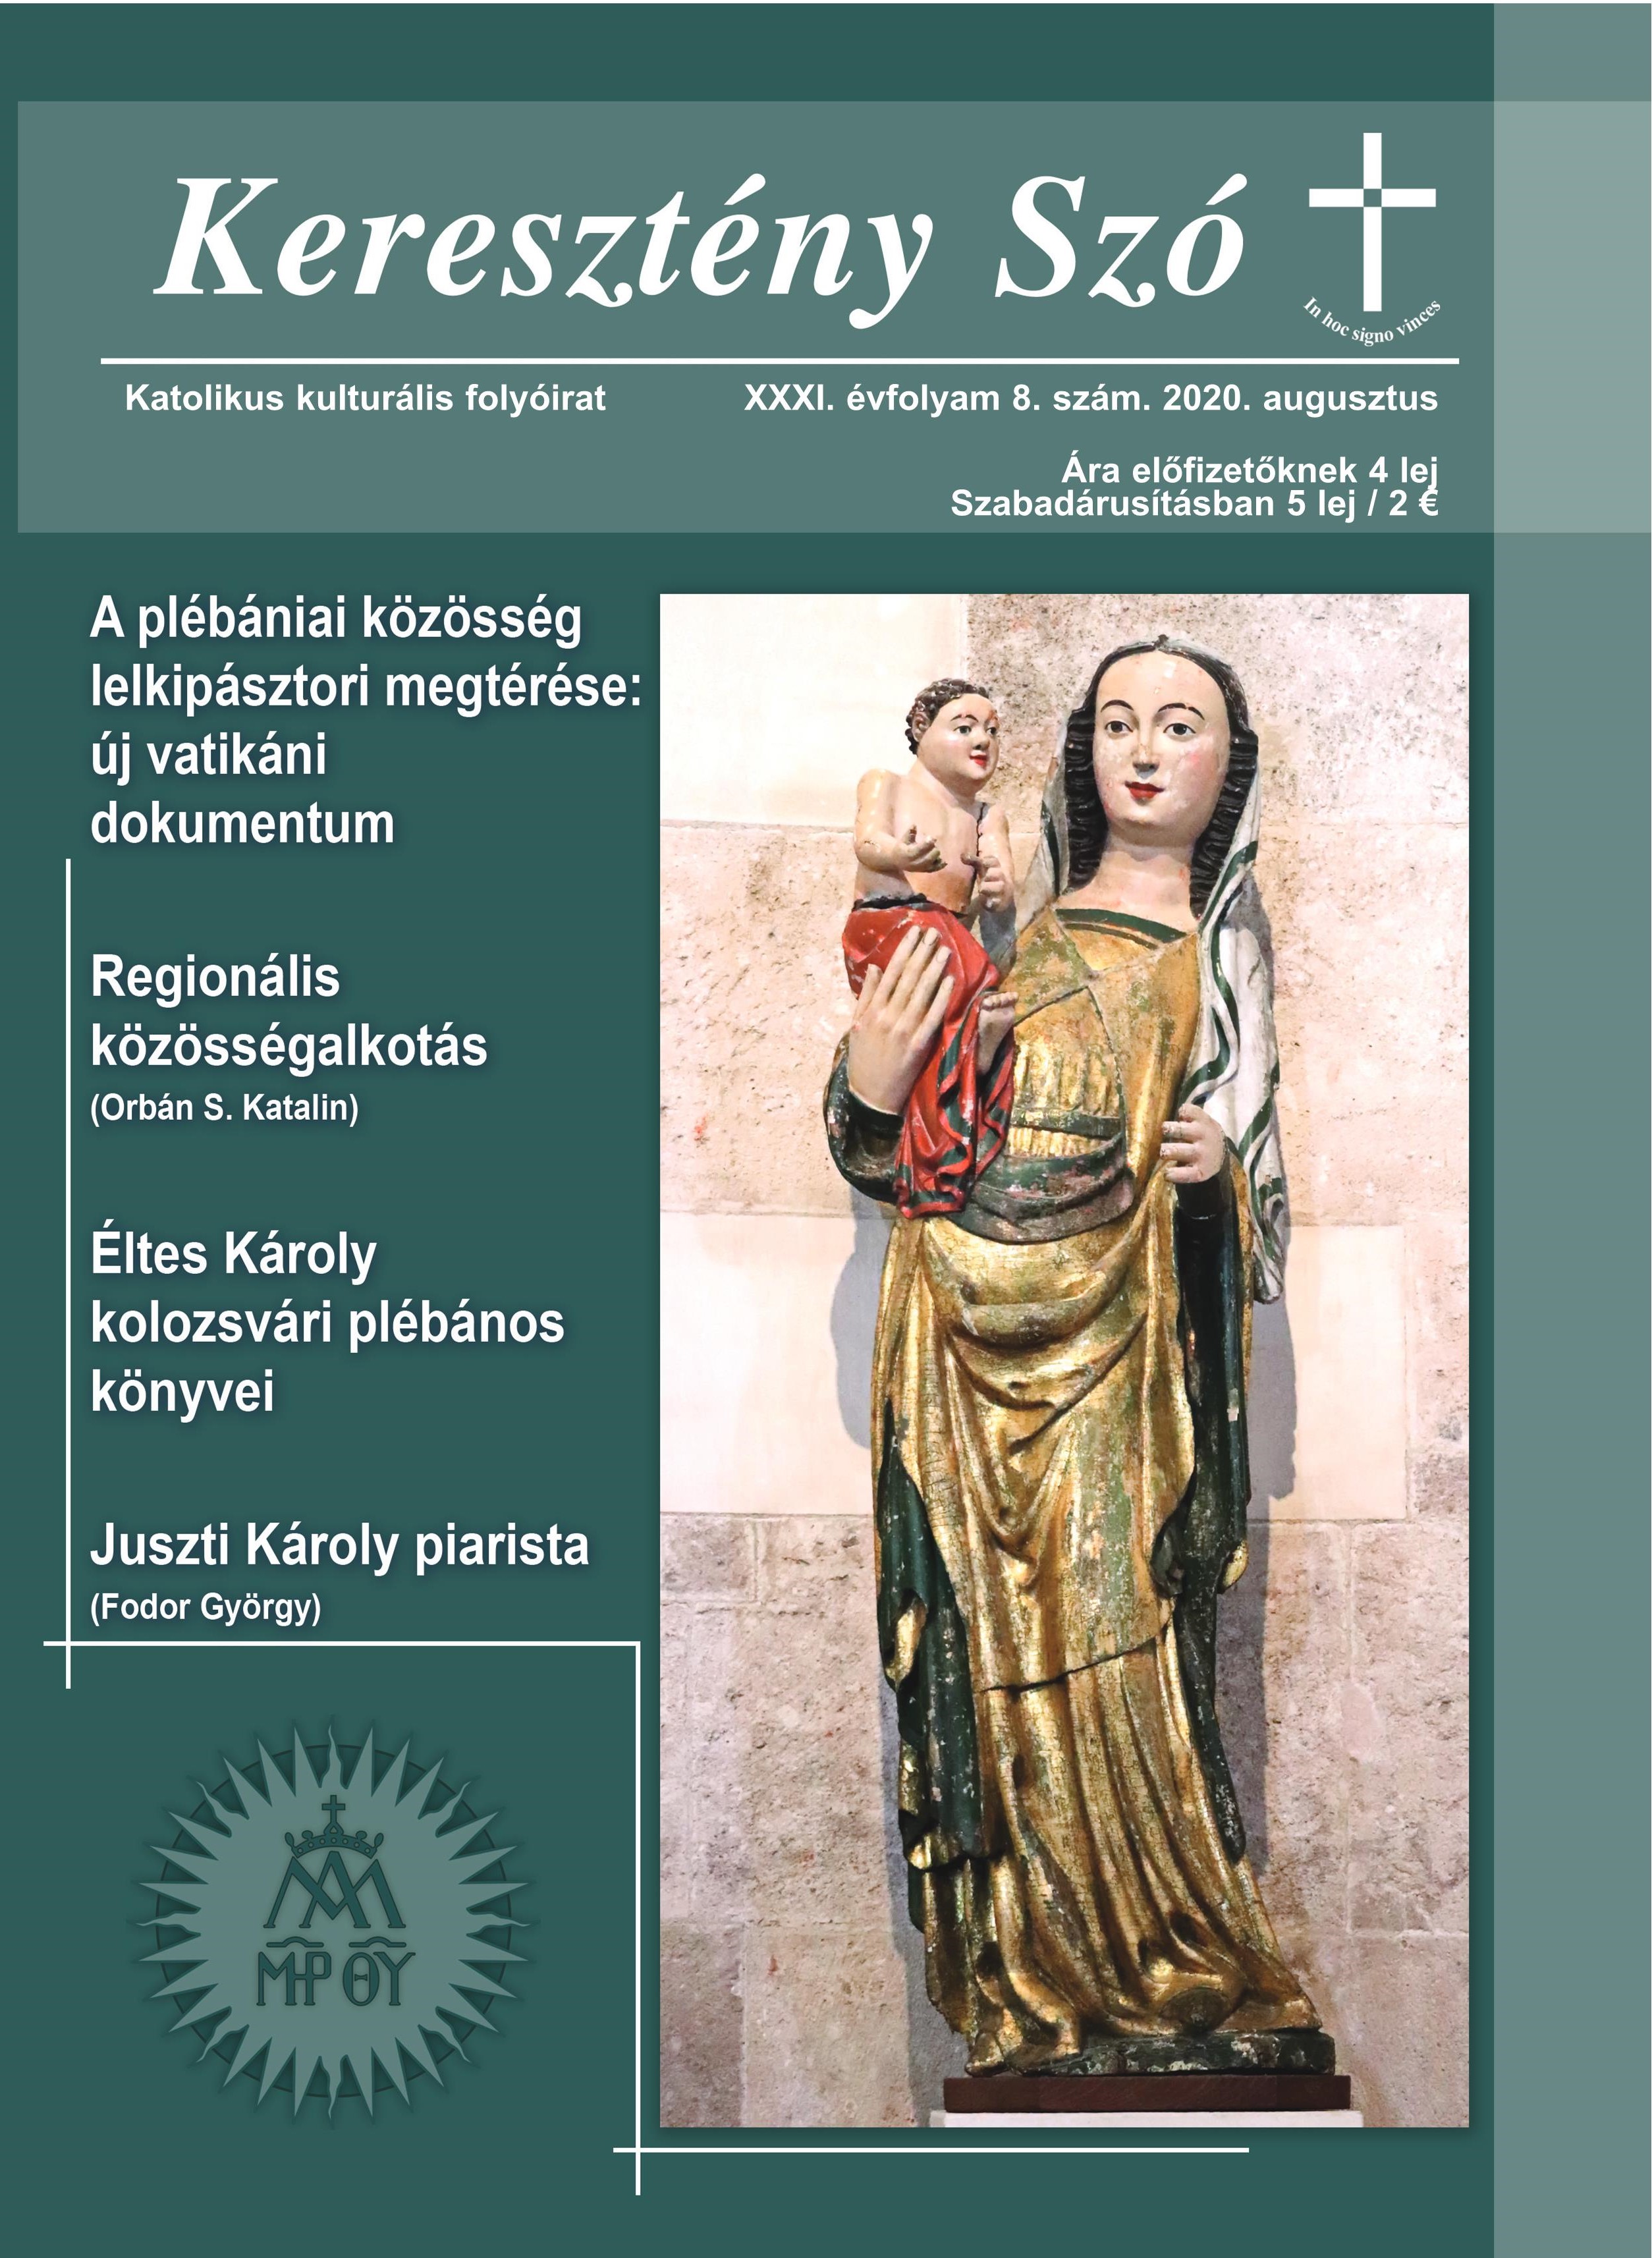 The literary work and book legacy of Károly Éltes, parish priest of Cluj Cover Image